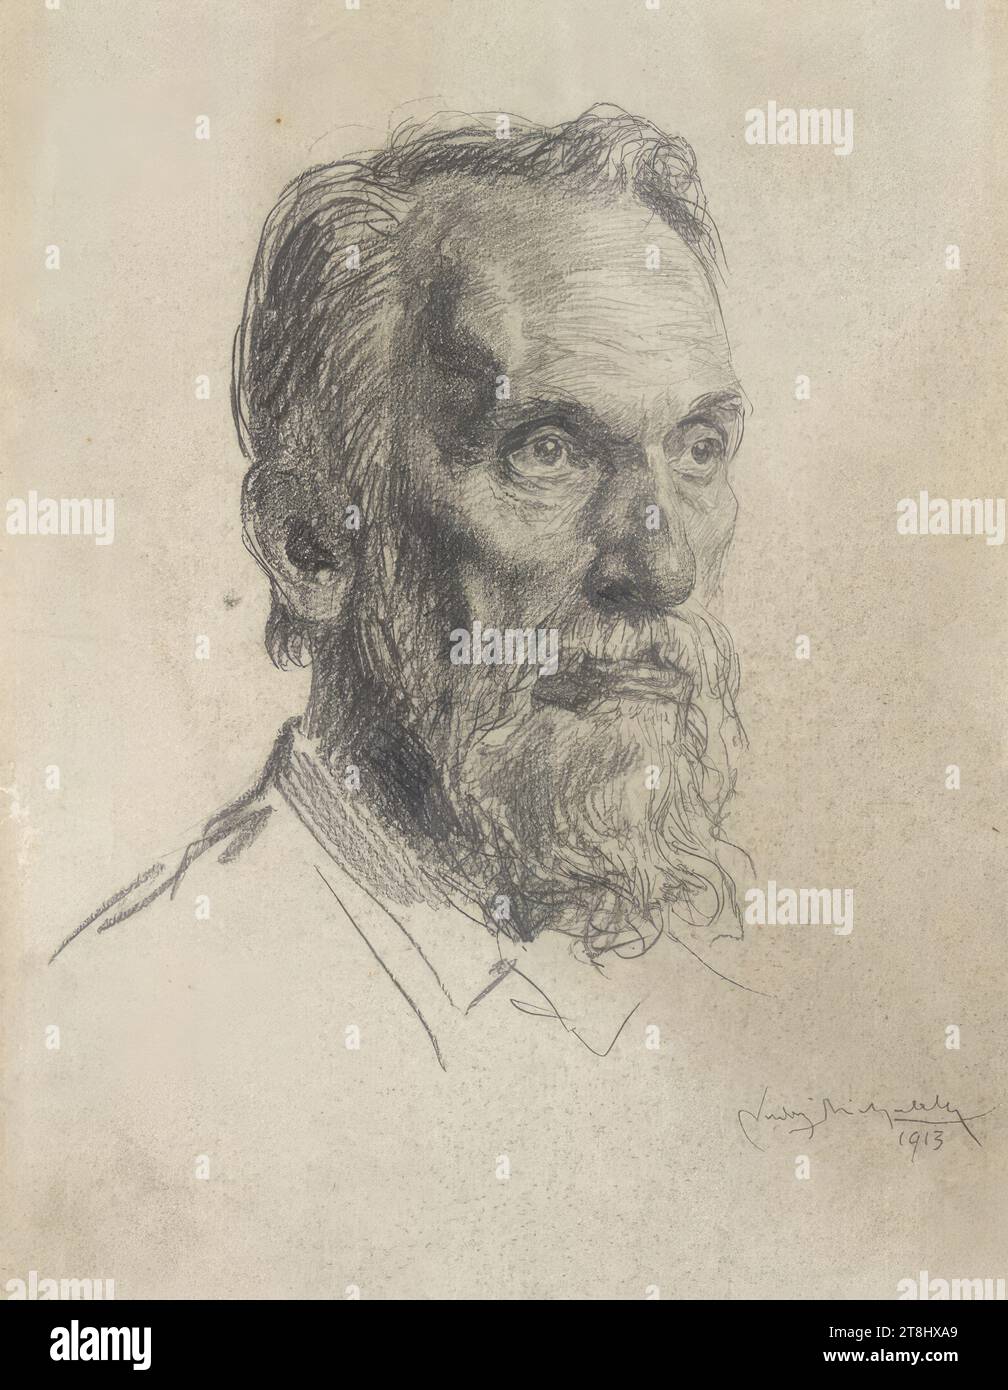 Study of the etching by Dr. Eugen Bormann, Ludwig Michalek, Temesvár 1859 - 1942 Vienna, 1913, drawing, pencil wiped, according to Cahier: 28.7 x 21 cm, l.l. 'Study for the etching Hofrat Dr. Eugen Bormann'; r.u. '26905, Austria Stock Photo